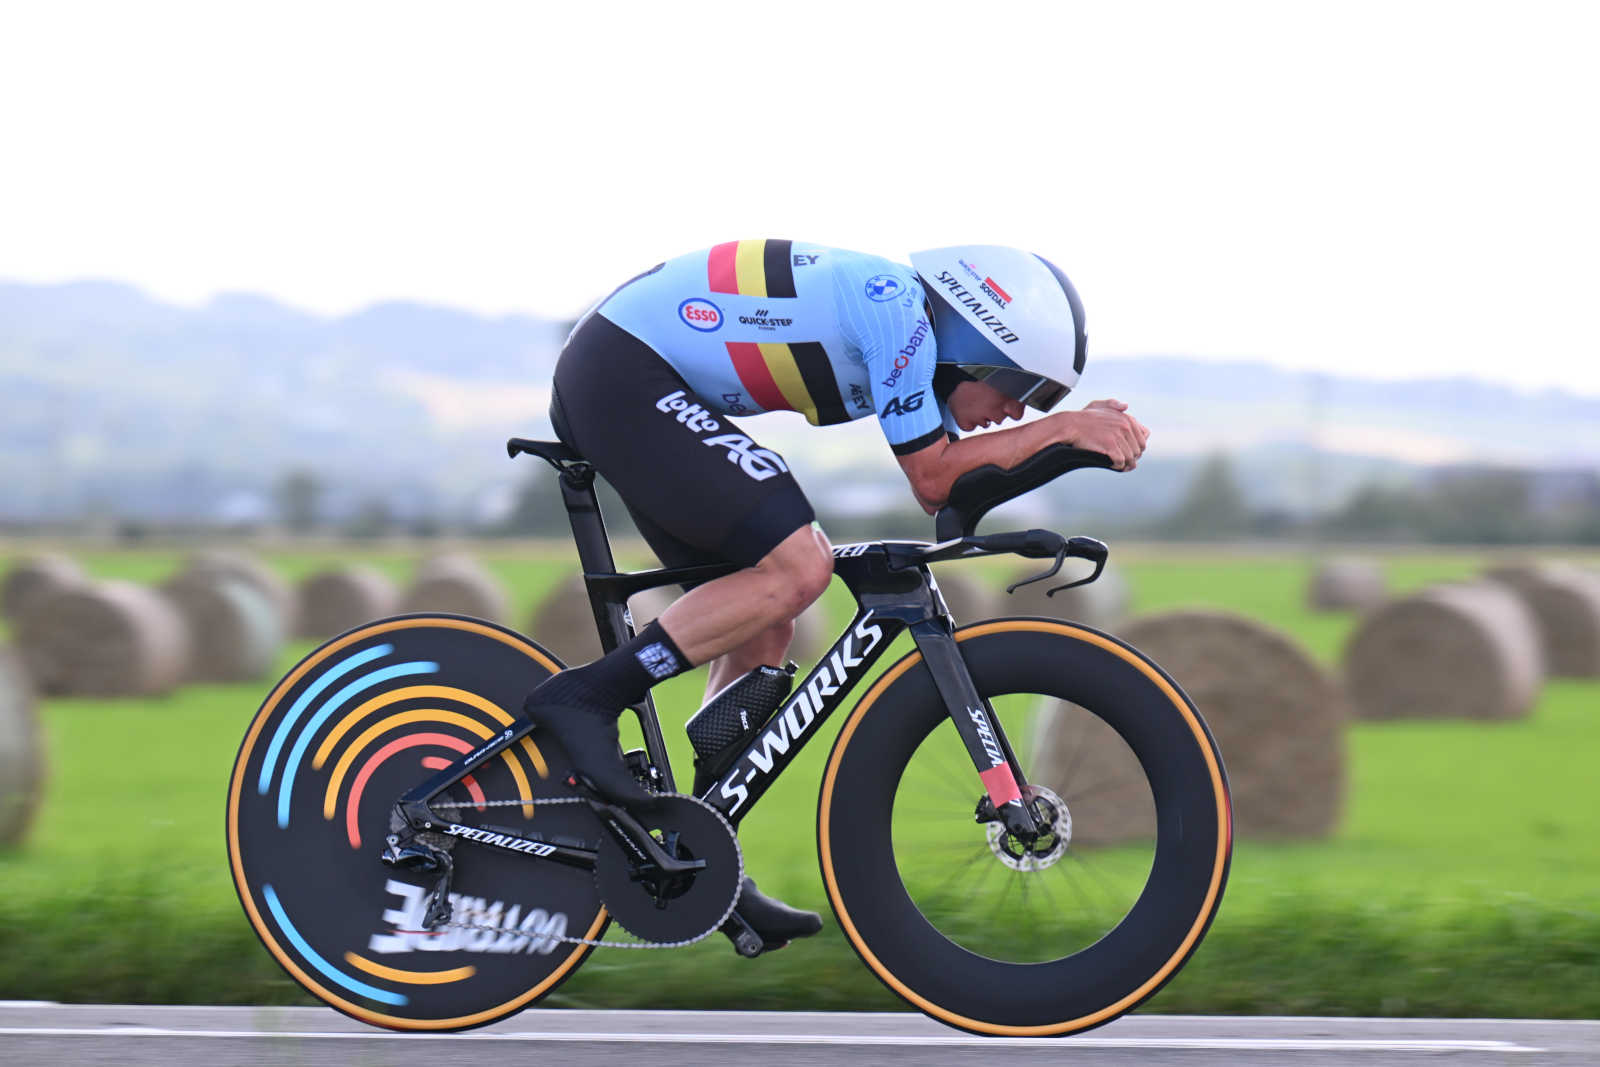 Remco Evenepoel won the world TT championship by stealing a page from triathlons playbook